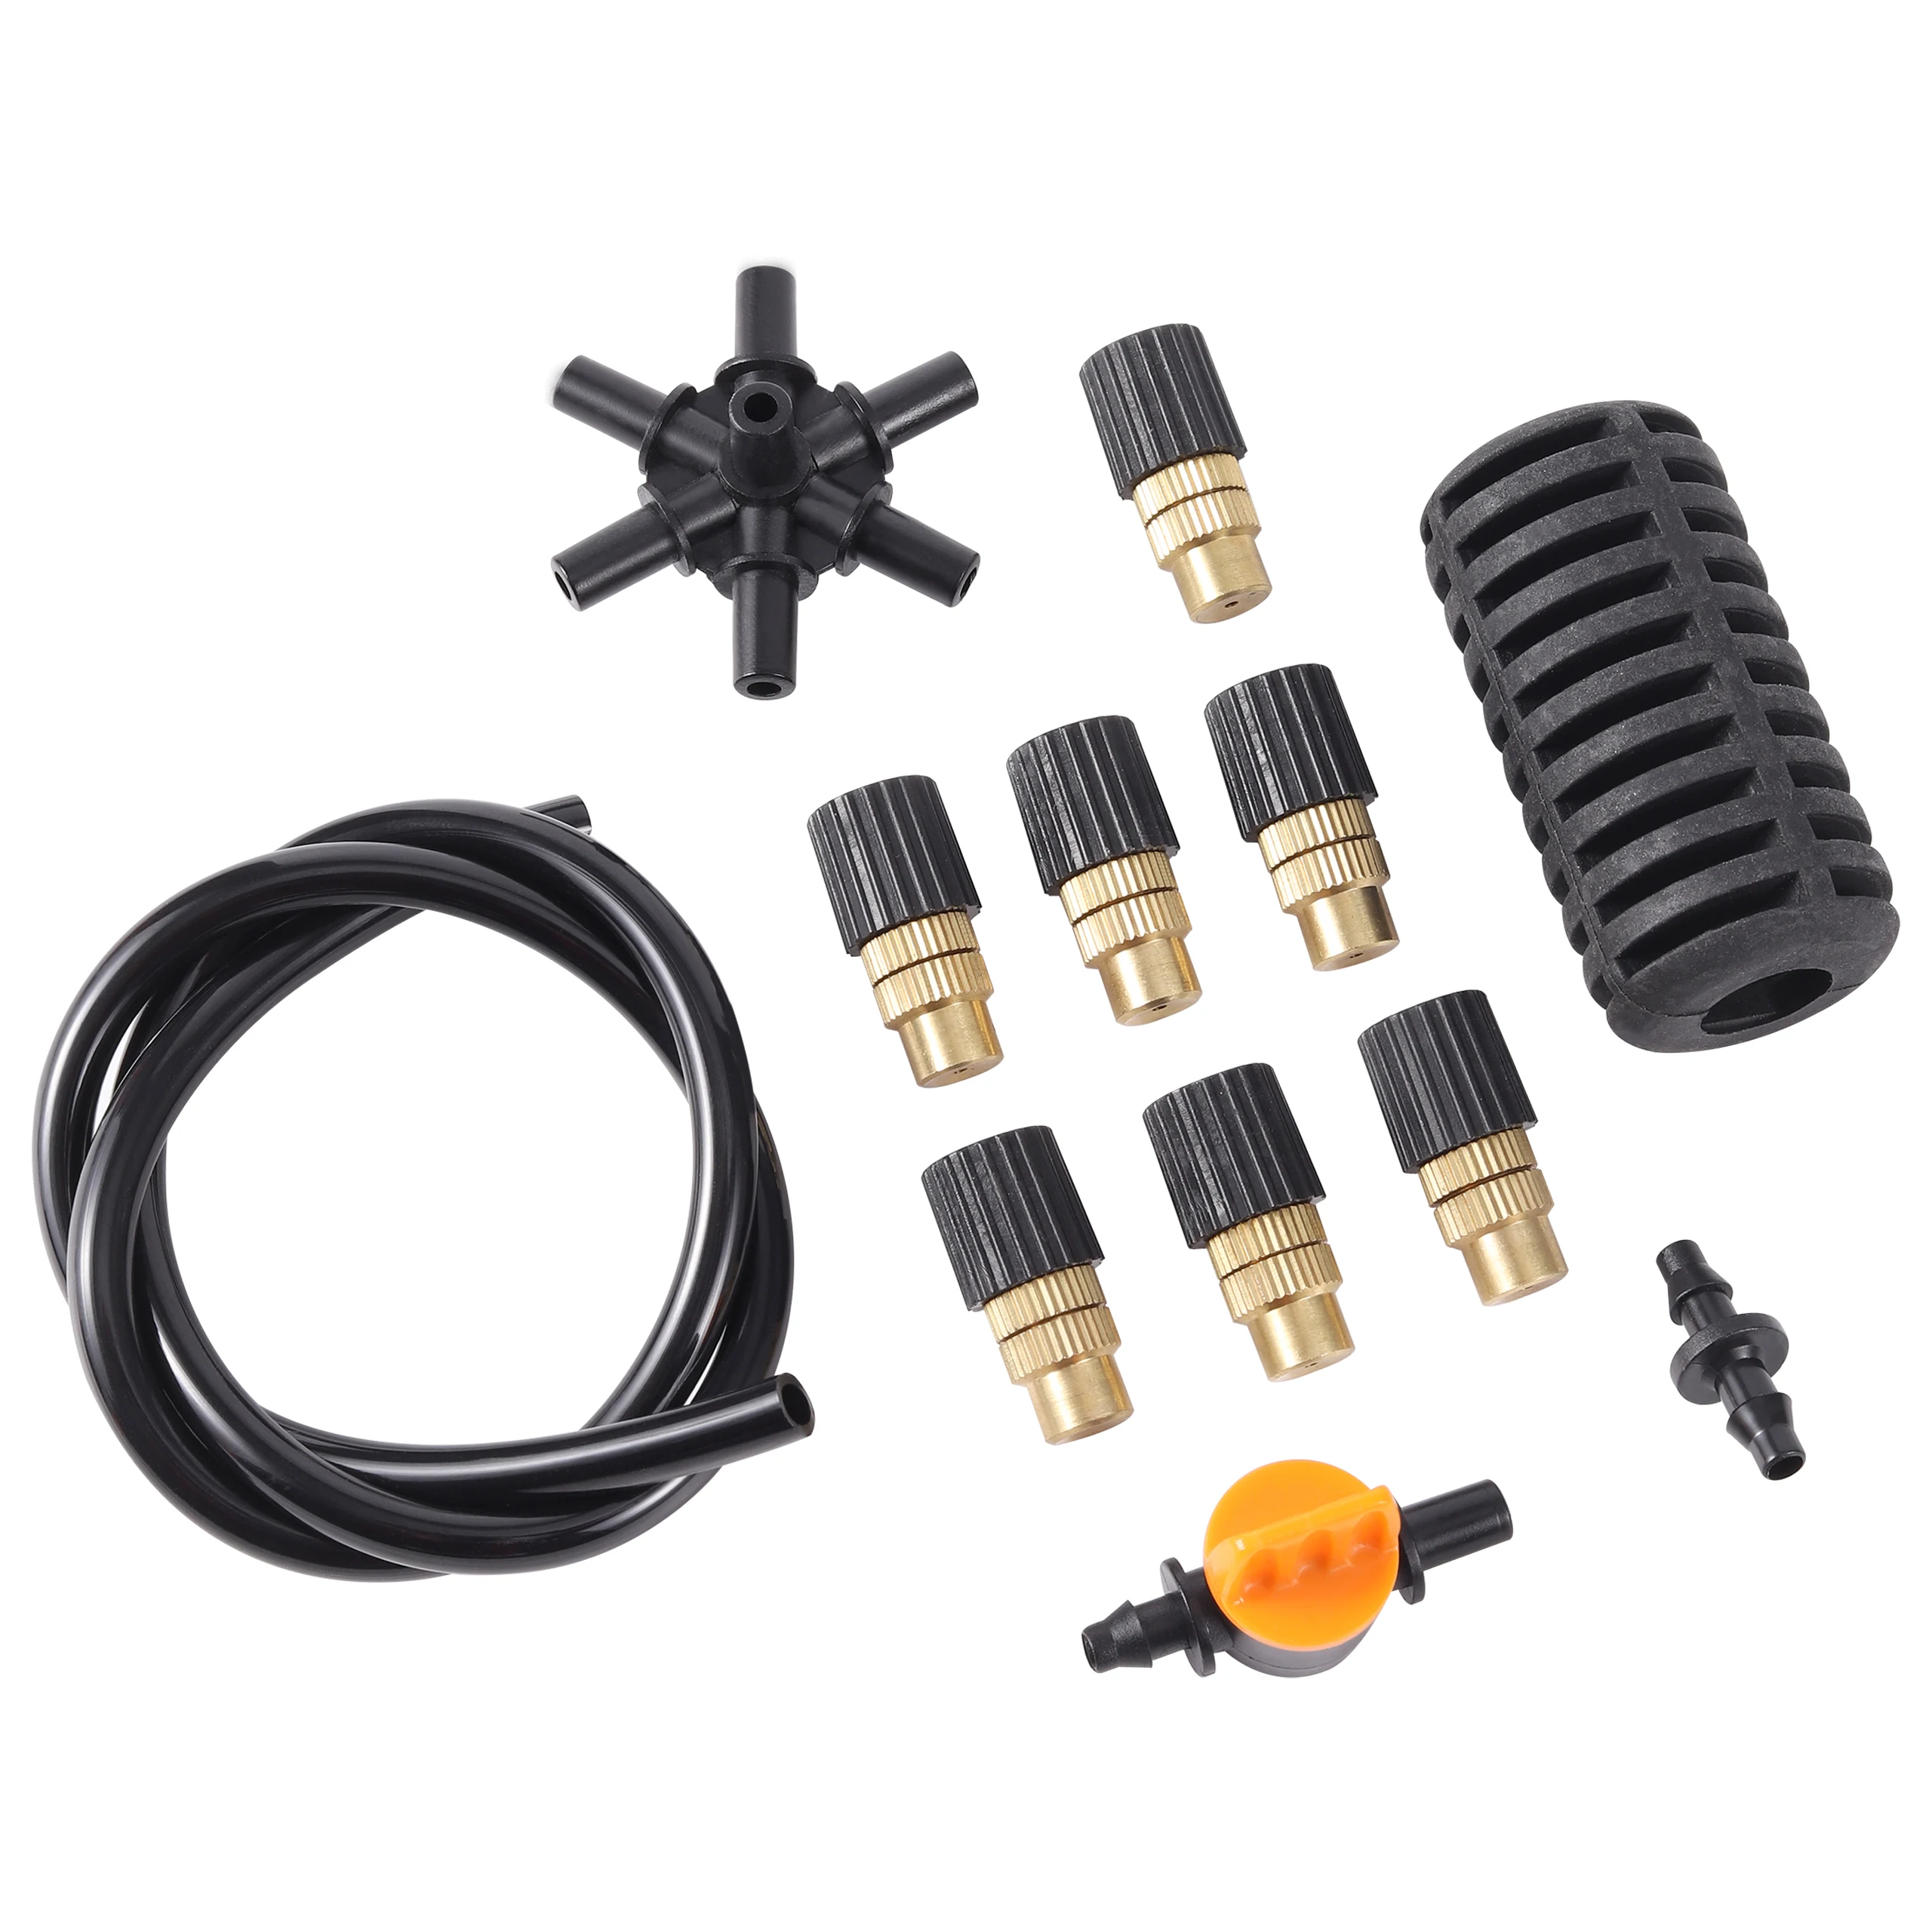 4/5/6/7 Way Adjustable Copper Misting Nozzle Kit Garden Atomization Irrigation System Water Kit Cooling Humidification Sprinkler images - 6